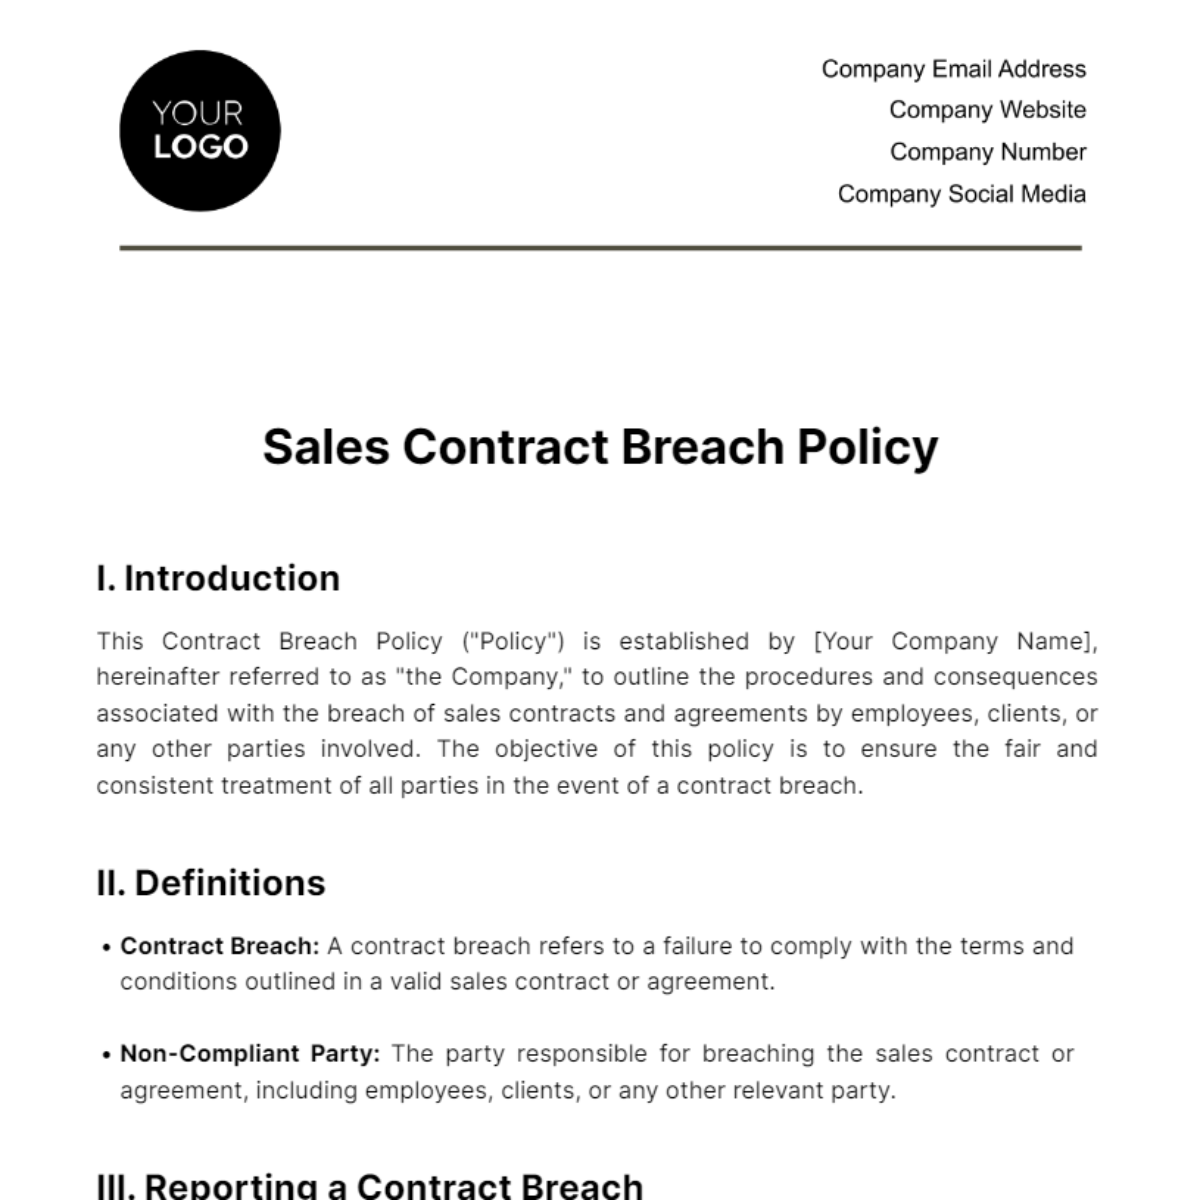 Free Sales Contract Breach Policy Template